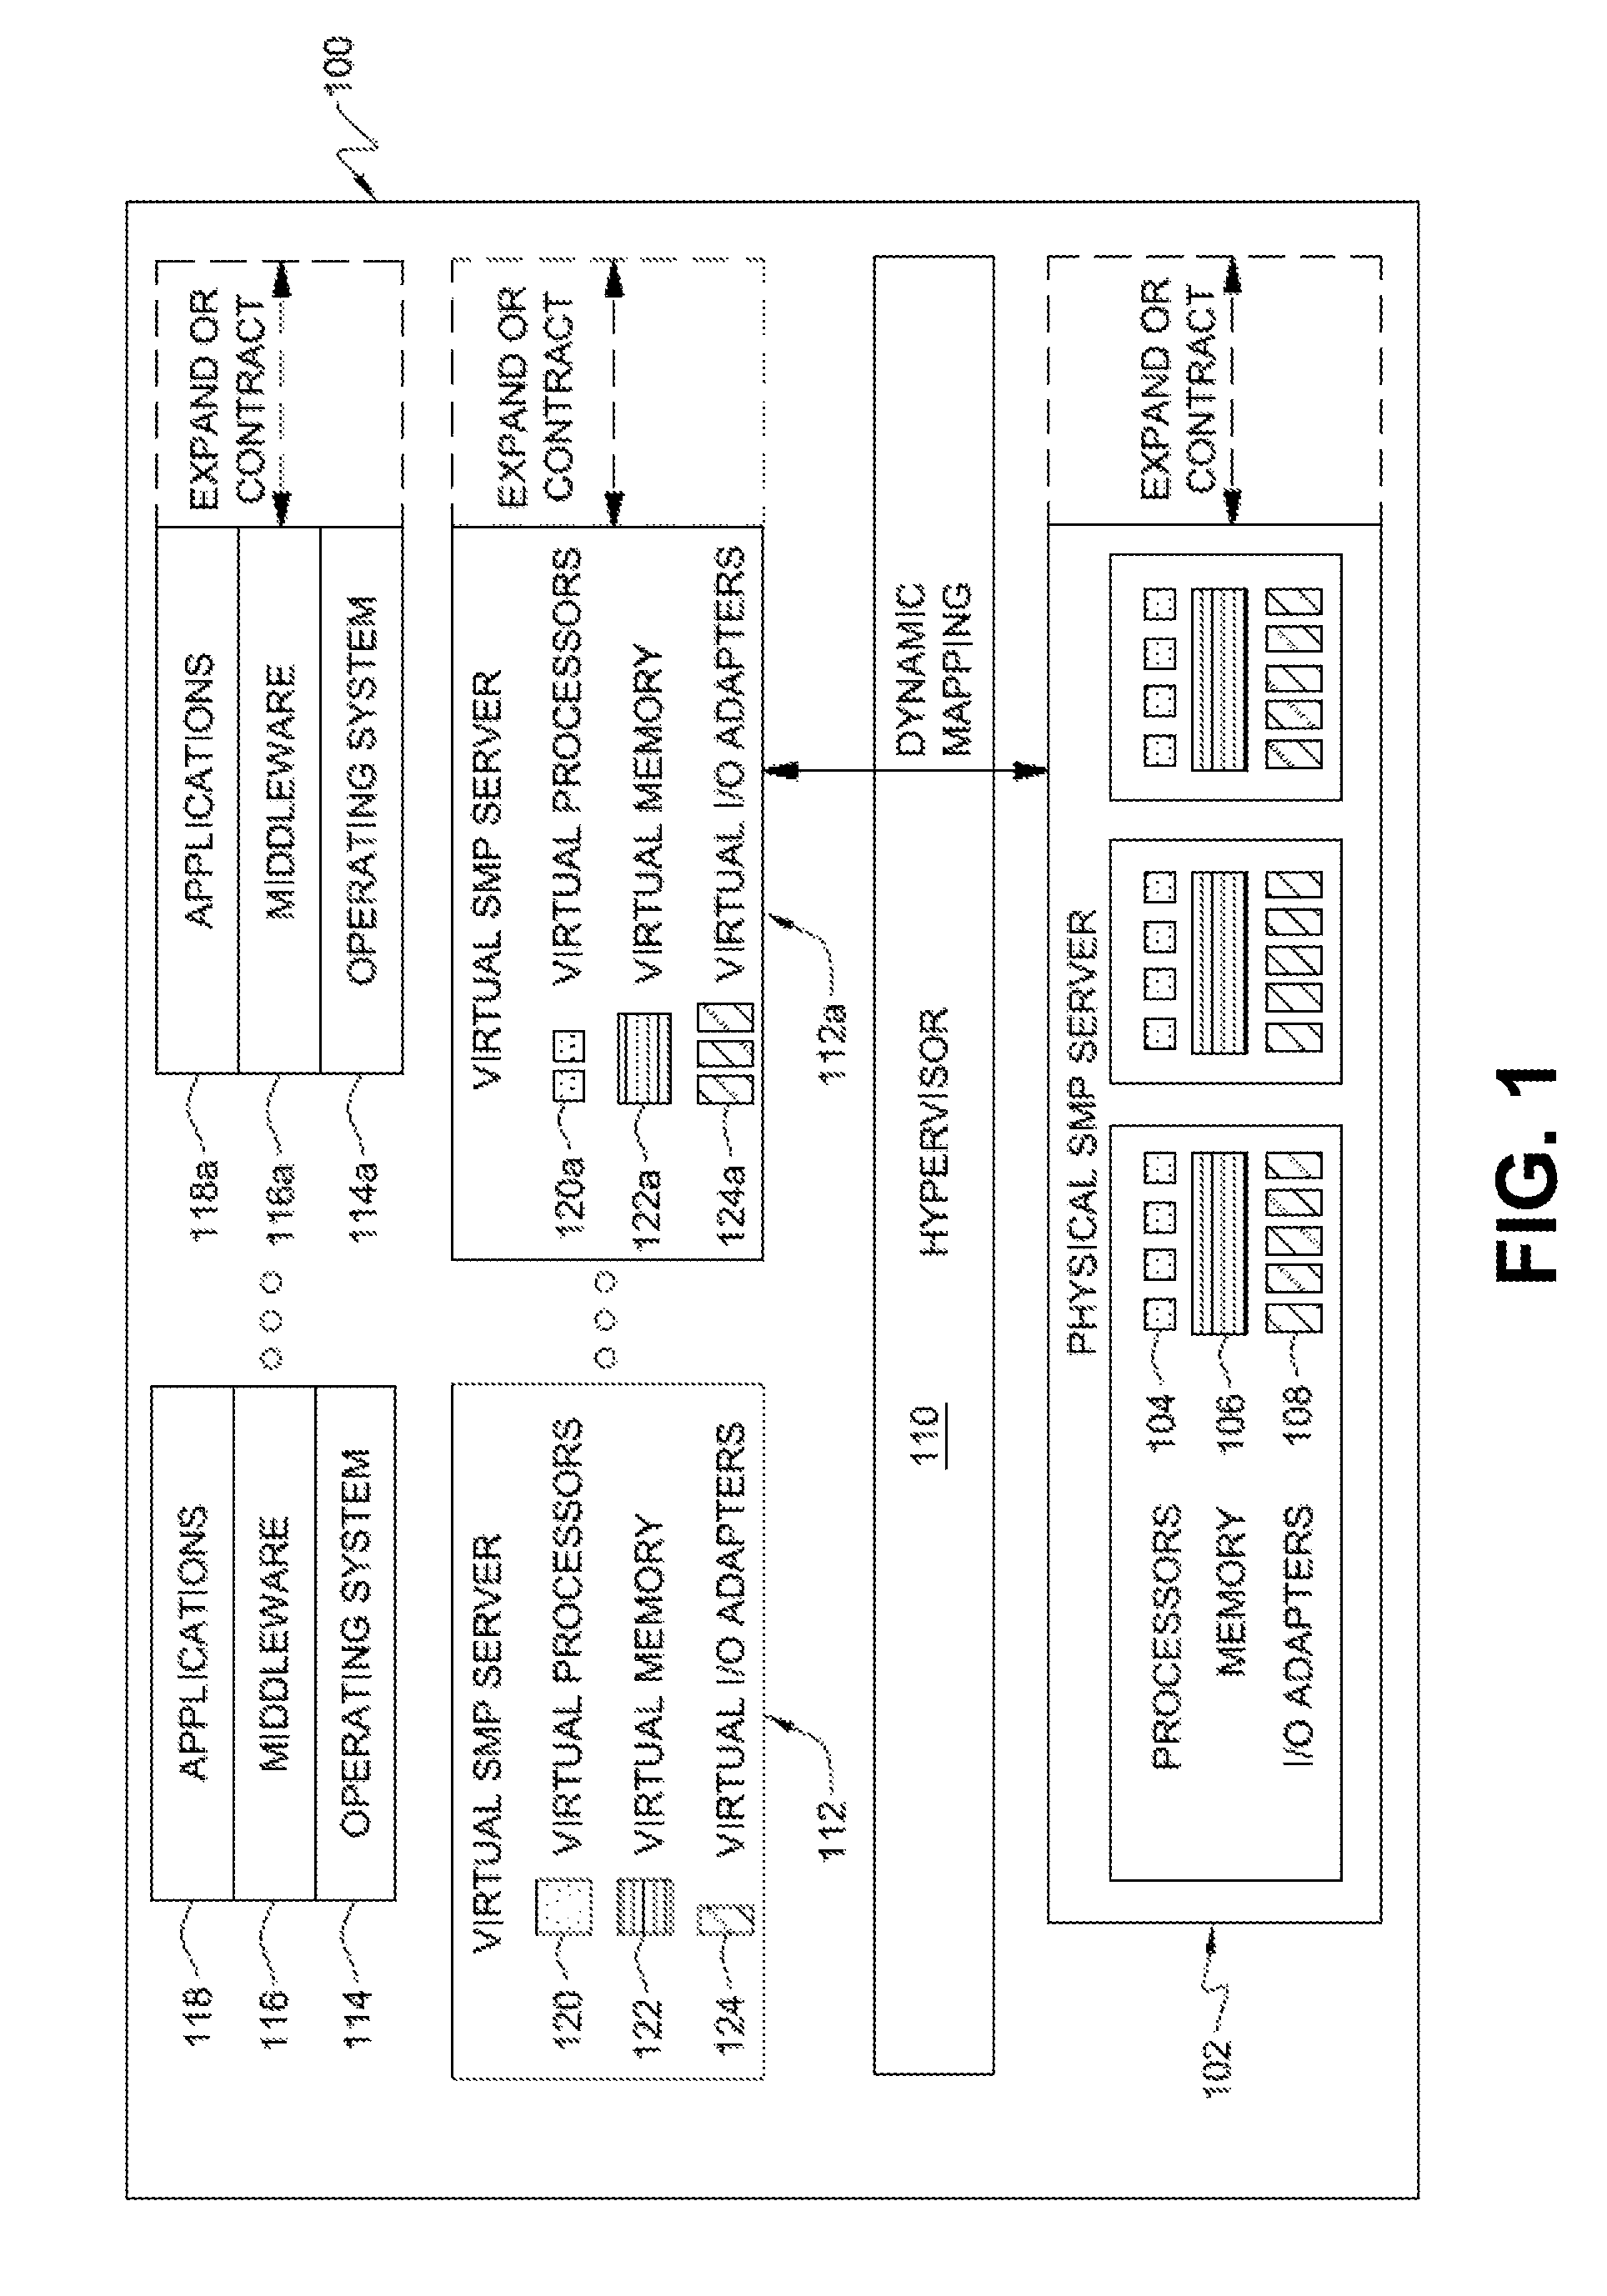 Adjunct partition work scheduling with quality of service attributes